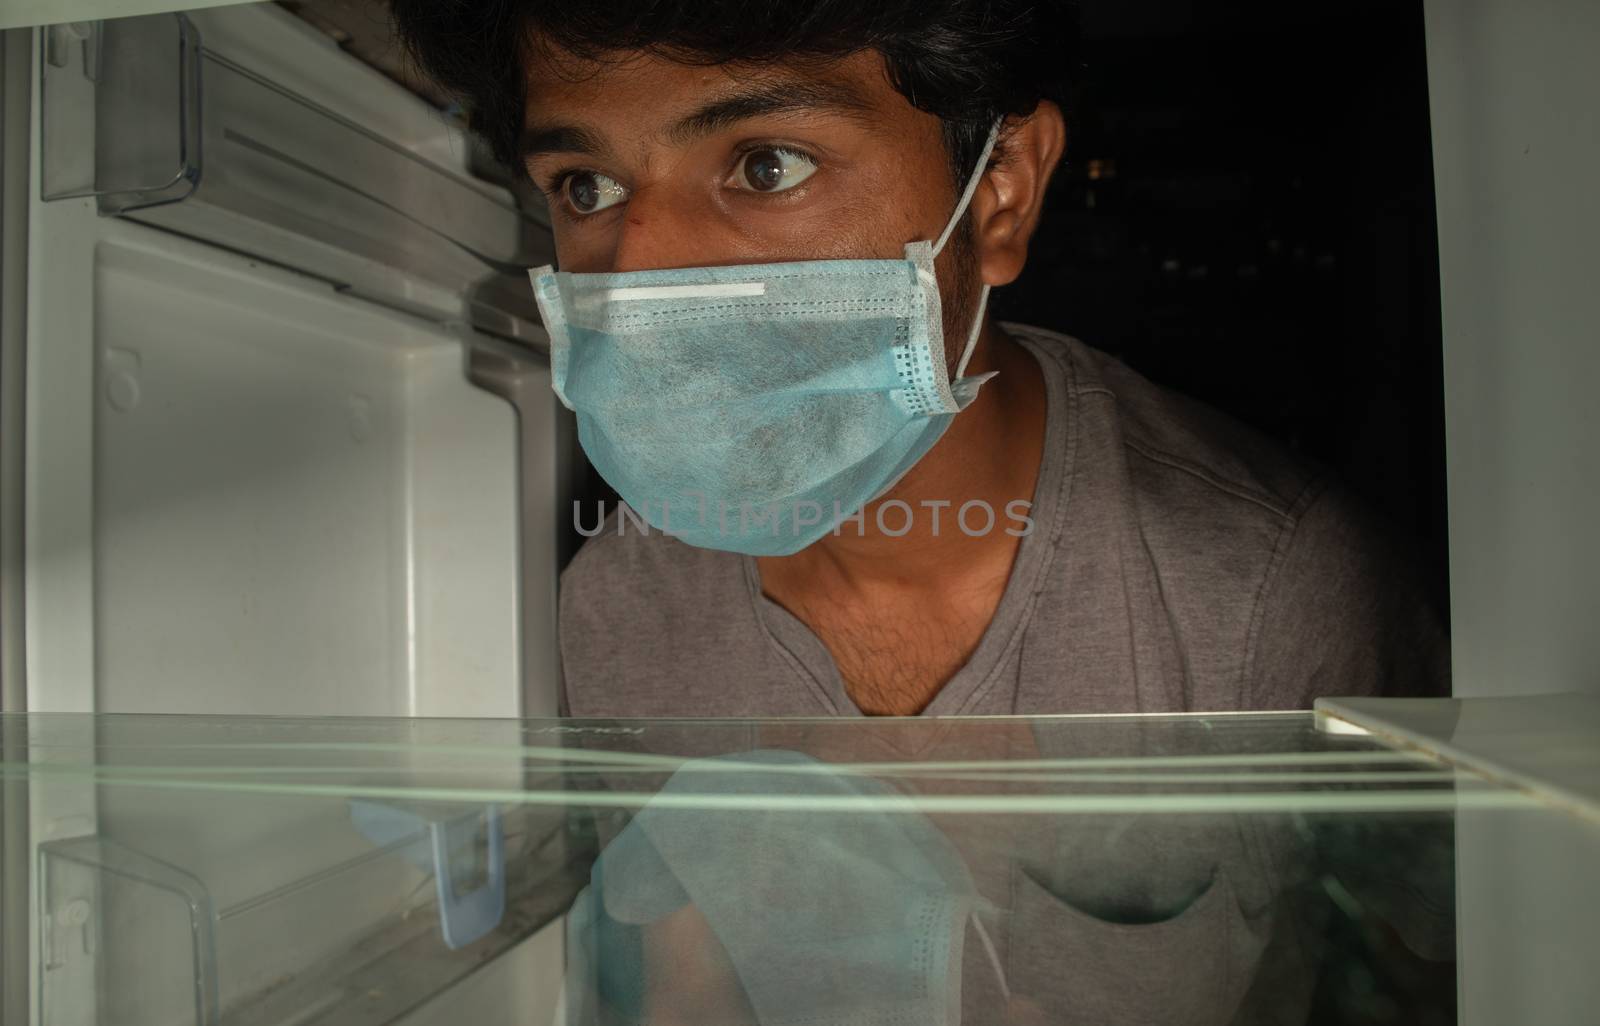 Man in a medical mask looks into empty fridge or refrigerator for food - Concept of no pantry food available during home quarantine at covid-19 or coronavirus by lakshmiprasad.maski@gmai.com